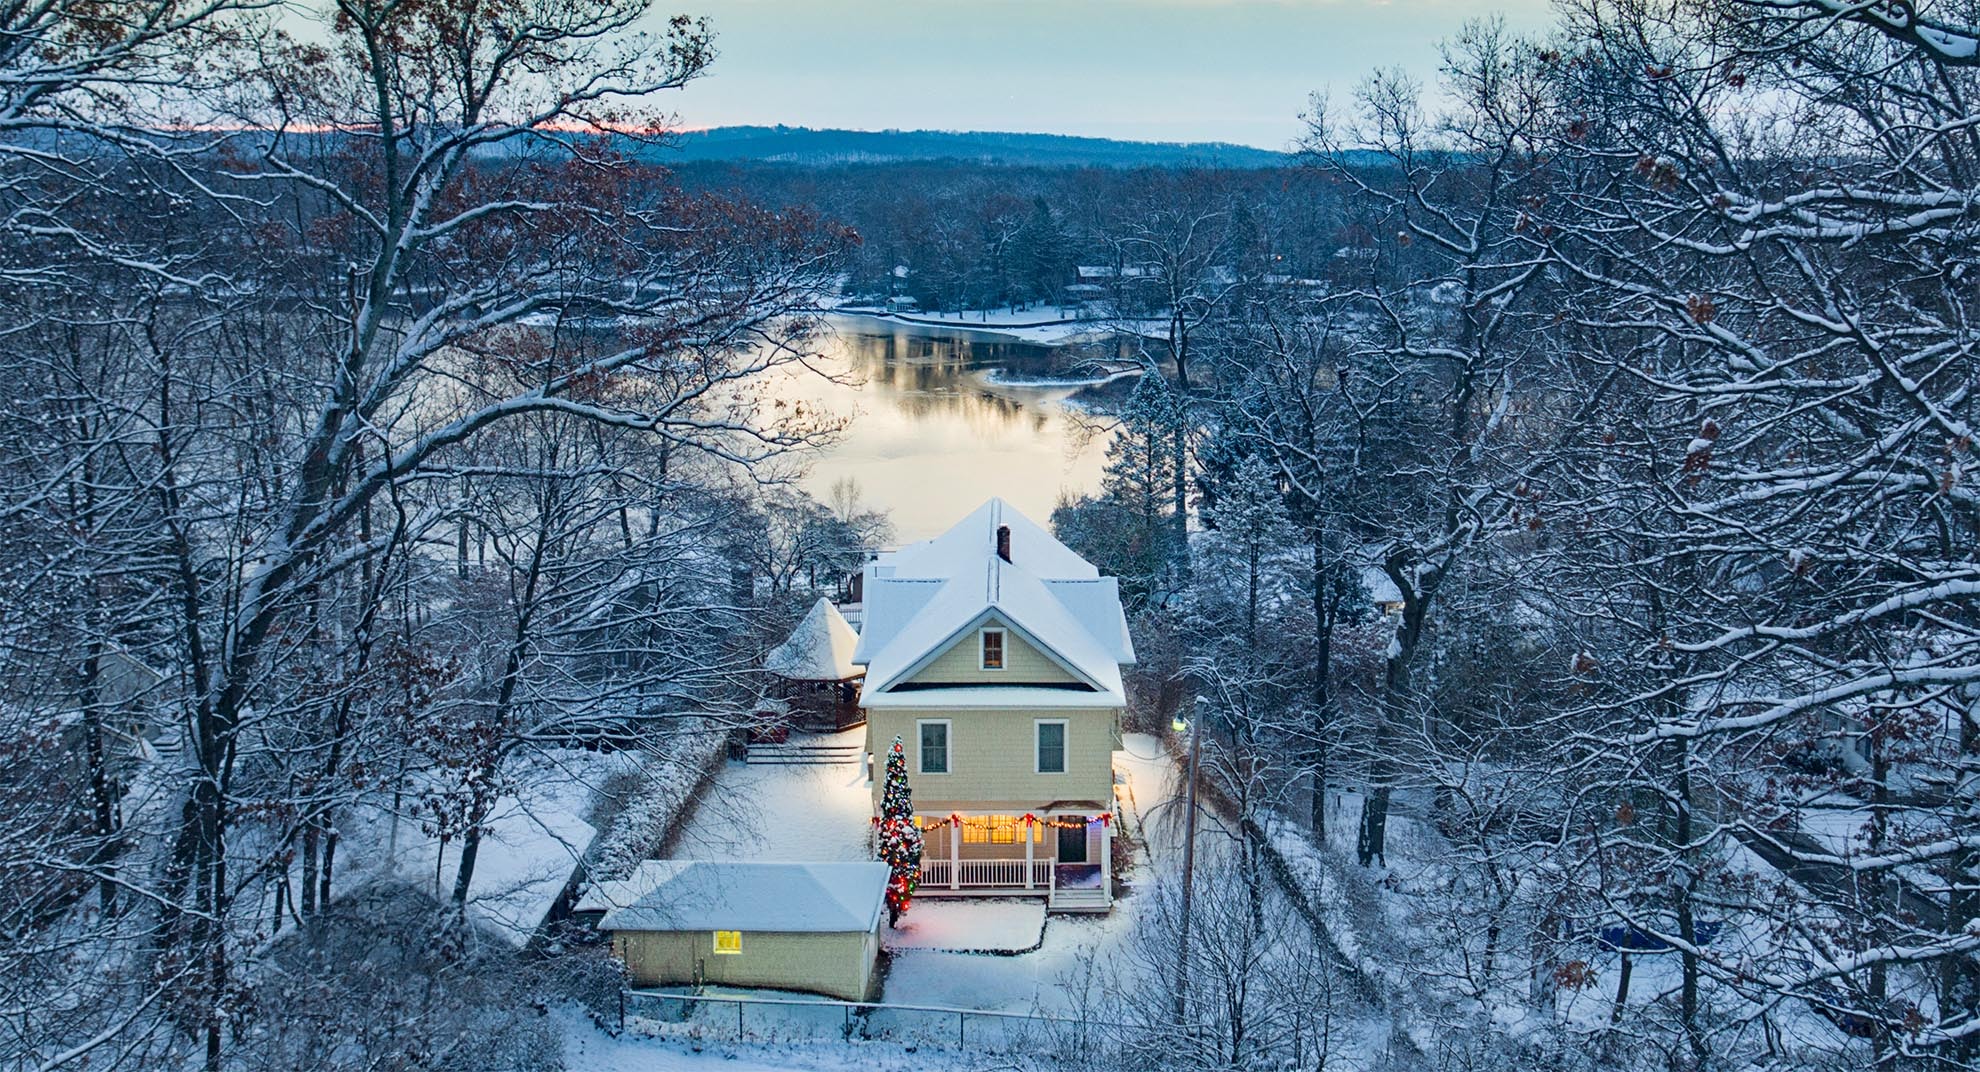 Drone Photograph of Lake Home with Christmas Decorations after snow fall